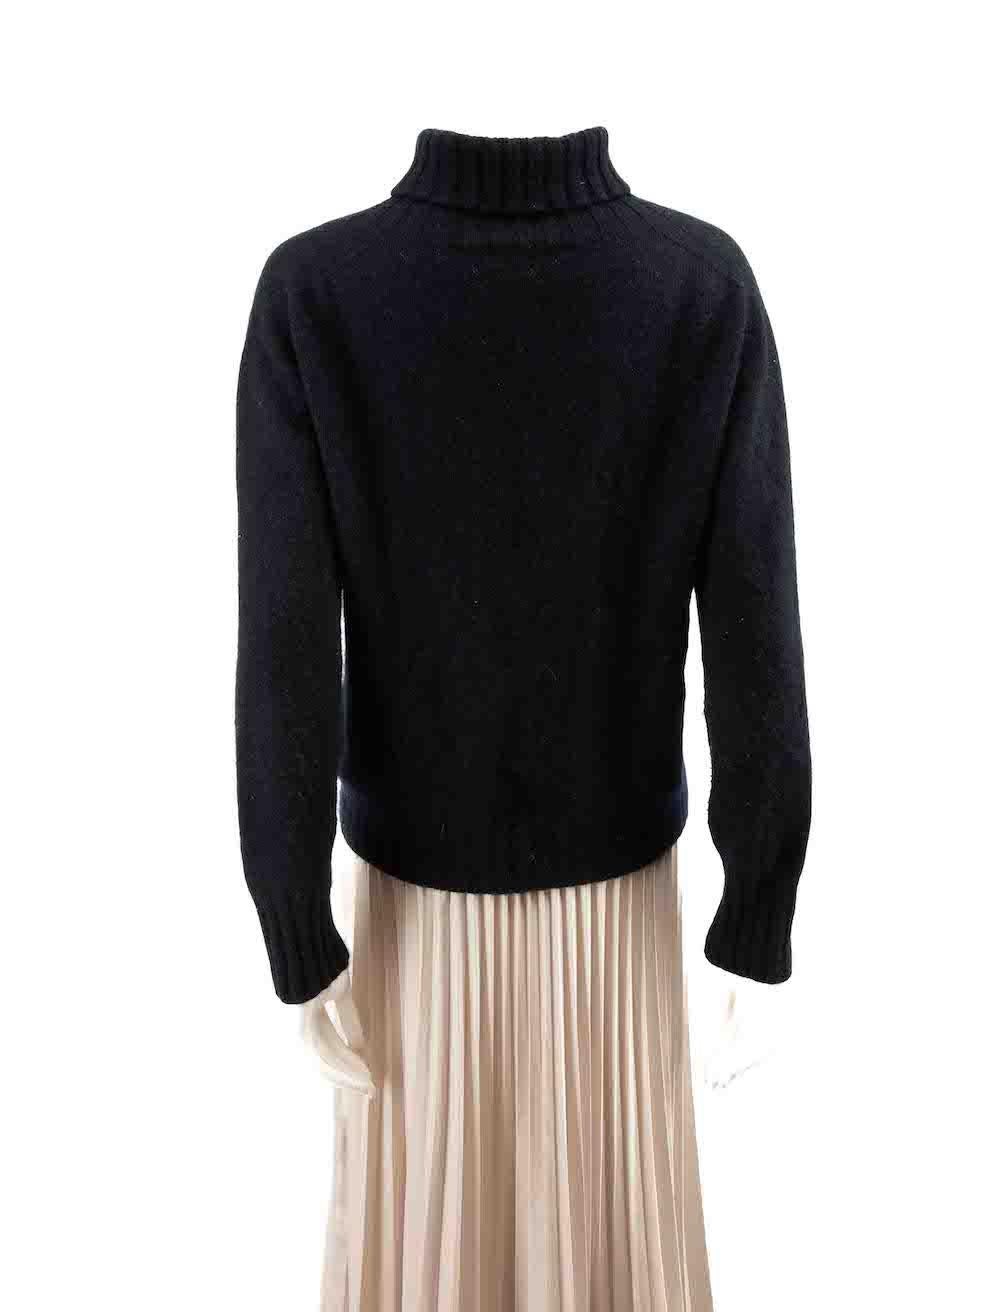 Margaret Howell Navy Cashmere High Neck Knit Jumper Size M In Good Condition For Sale In London, GB